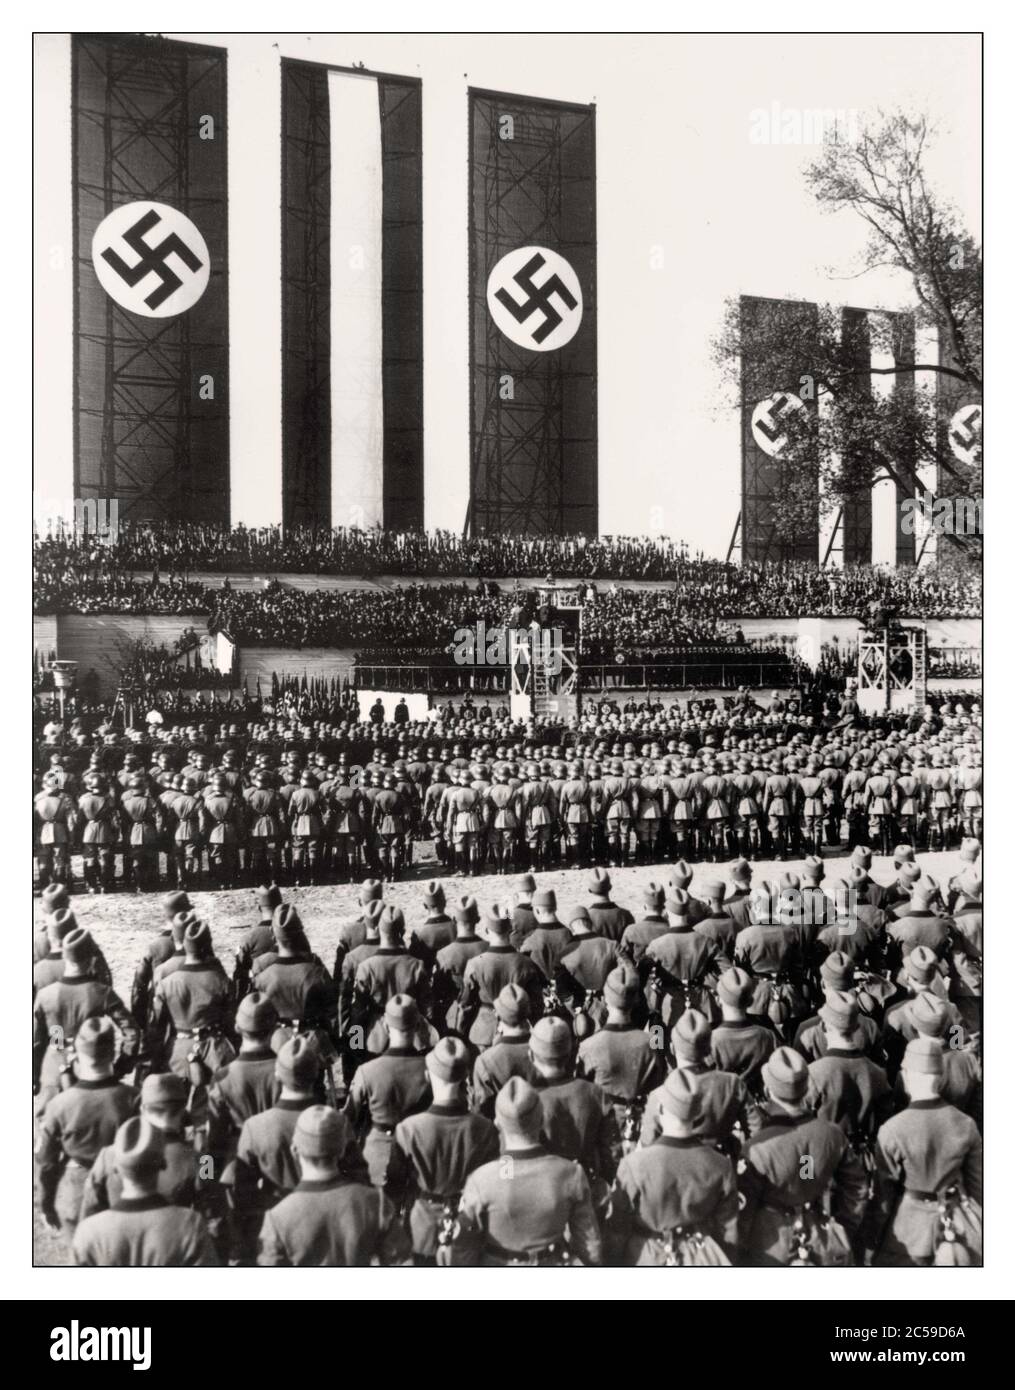 1934 German chancellor Adolf Hitler speaking from an elevated podium, with Nazi Swastika flags hanging as a backdrop behind him, surrounded by German troops at the Tempelhof airport in Berlin, Germany Adolf Hitler delivers his May Day speech in May 1934 Stock Photo